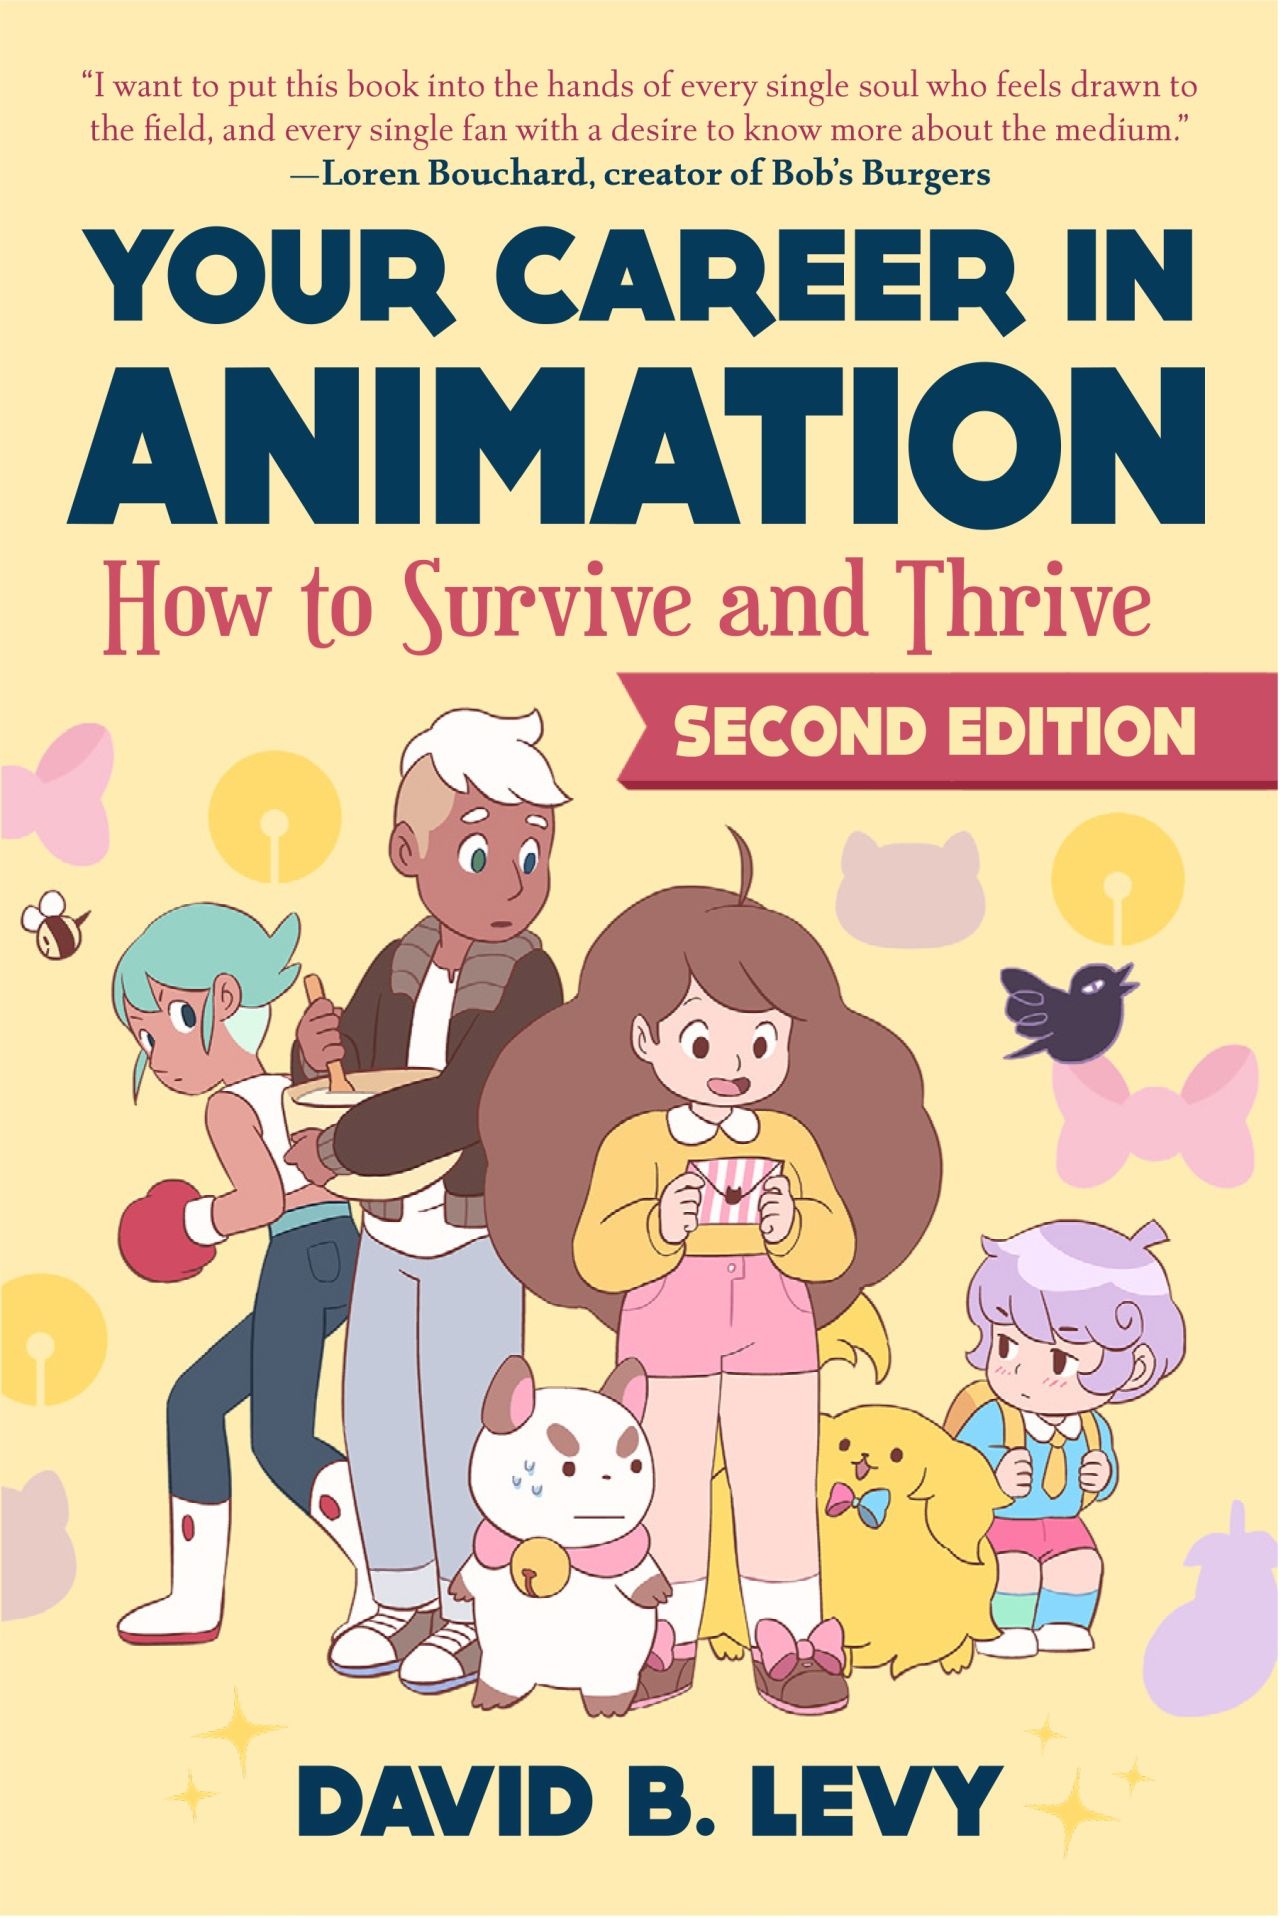 ‘Your Career in Animation How to Survive and Thrive’ Now Available